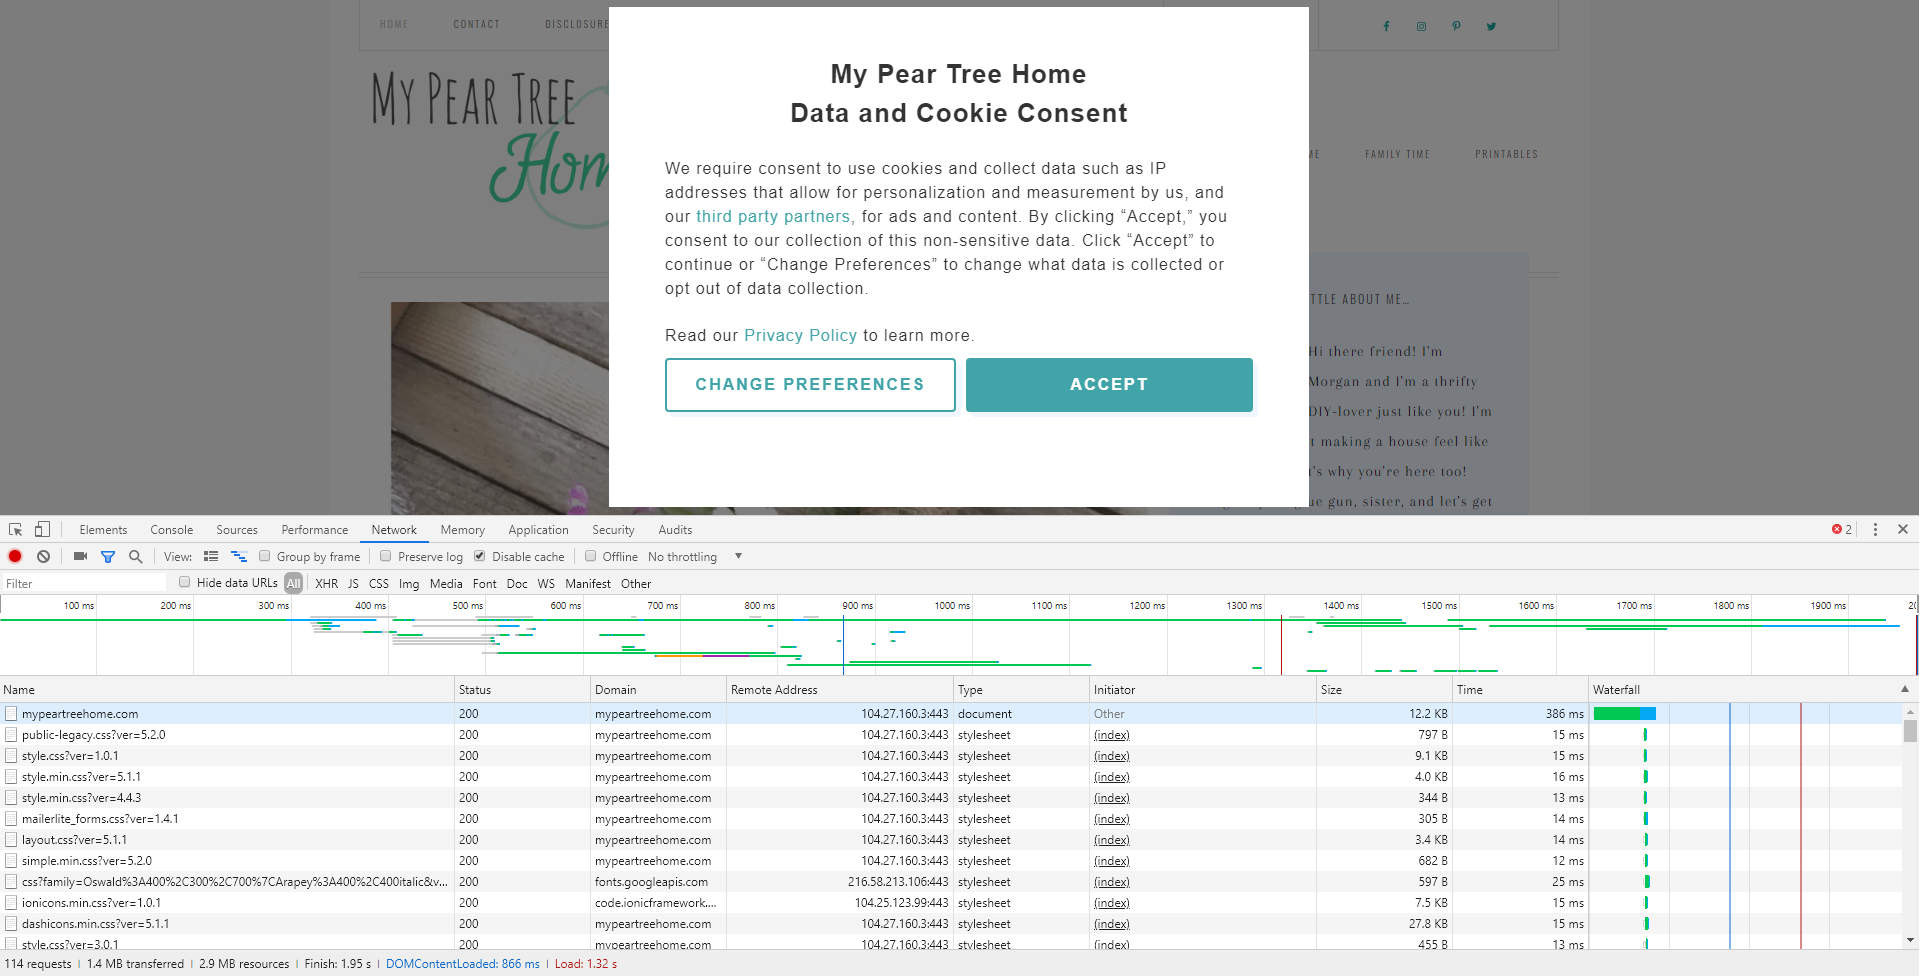 www.mypeartreehome.com Speed Comparison After